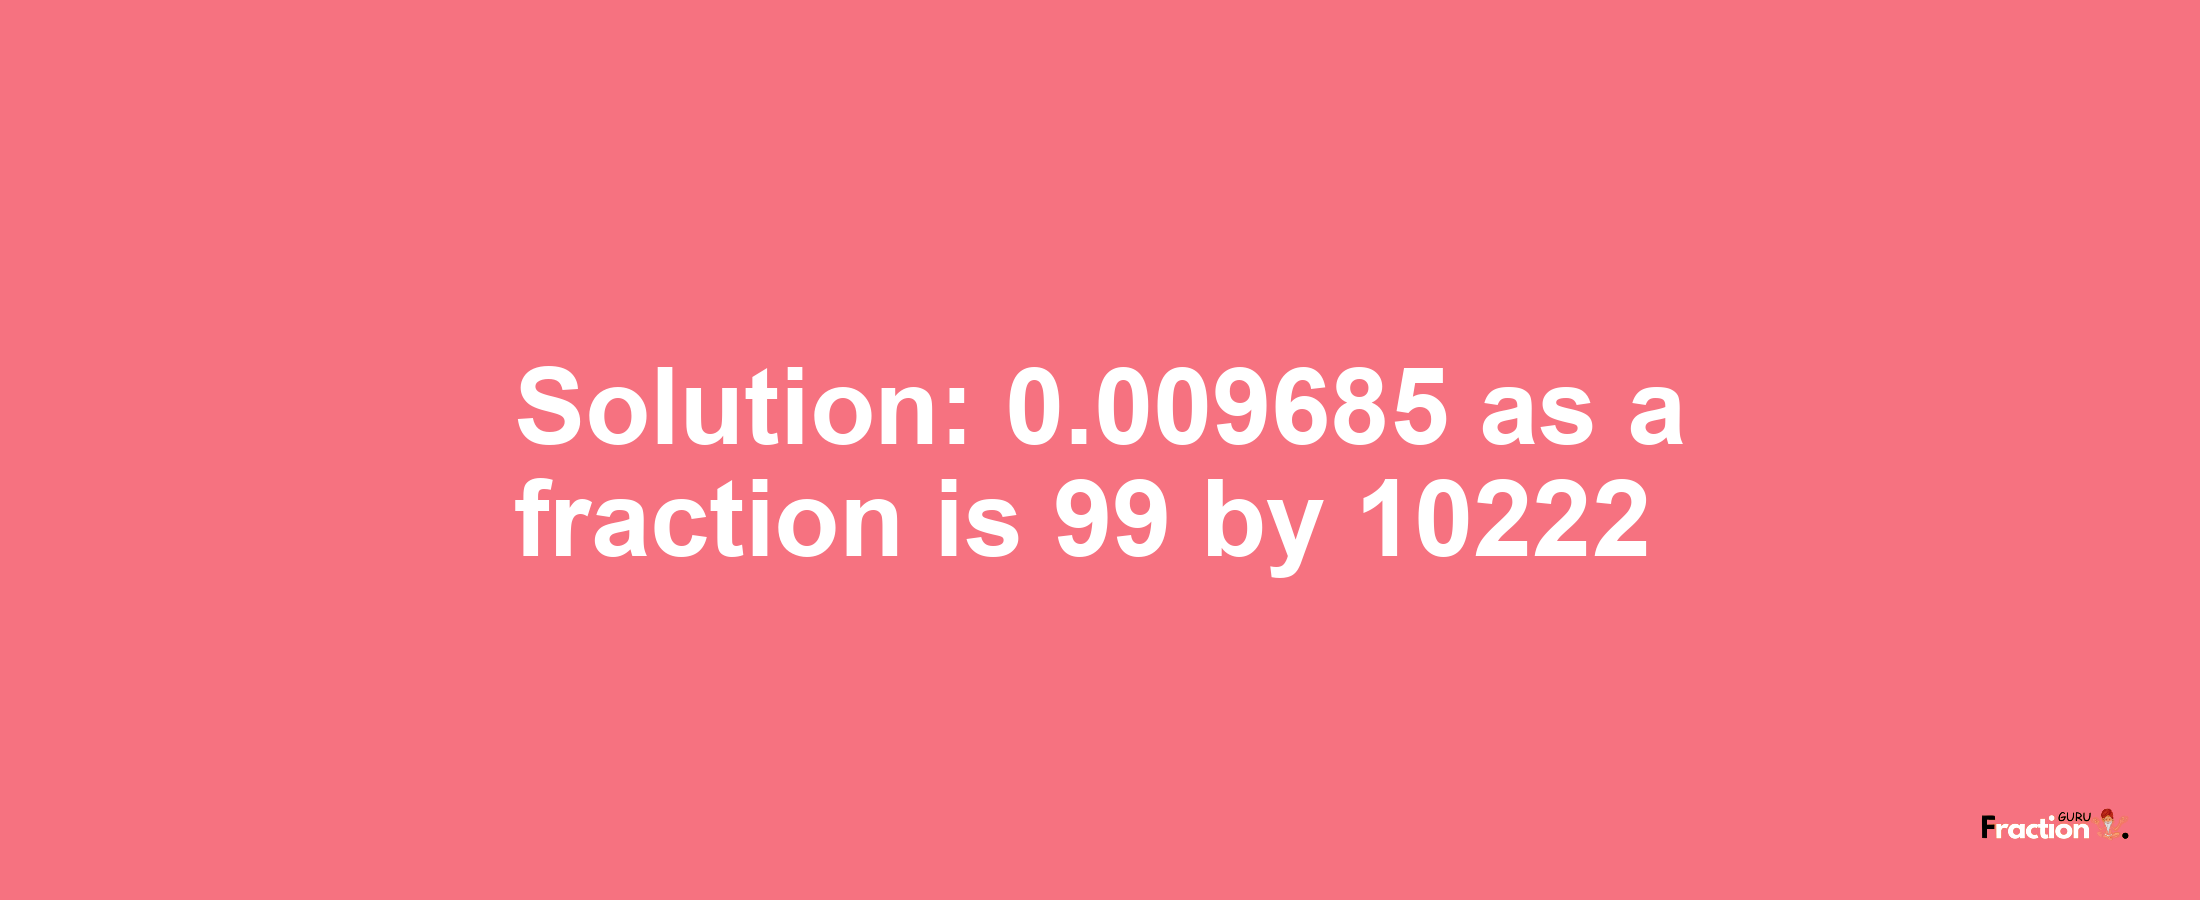 Solution:0.009685 as a fraction is 99/10222